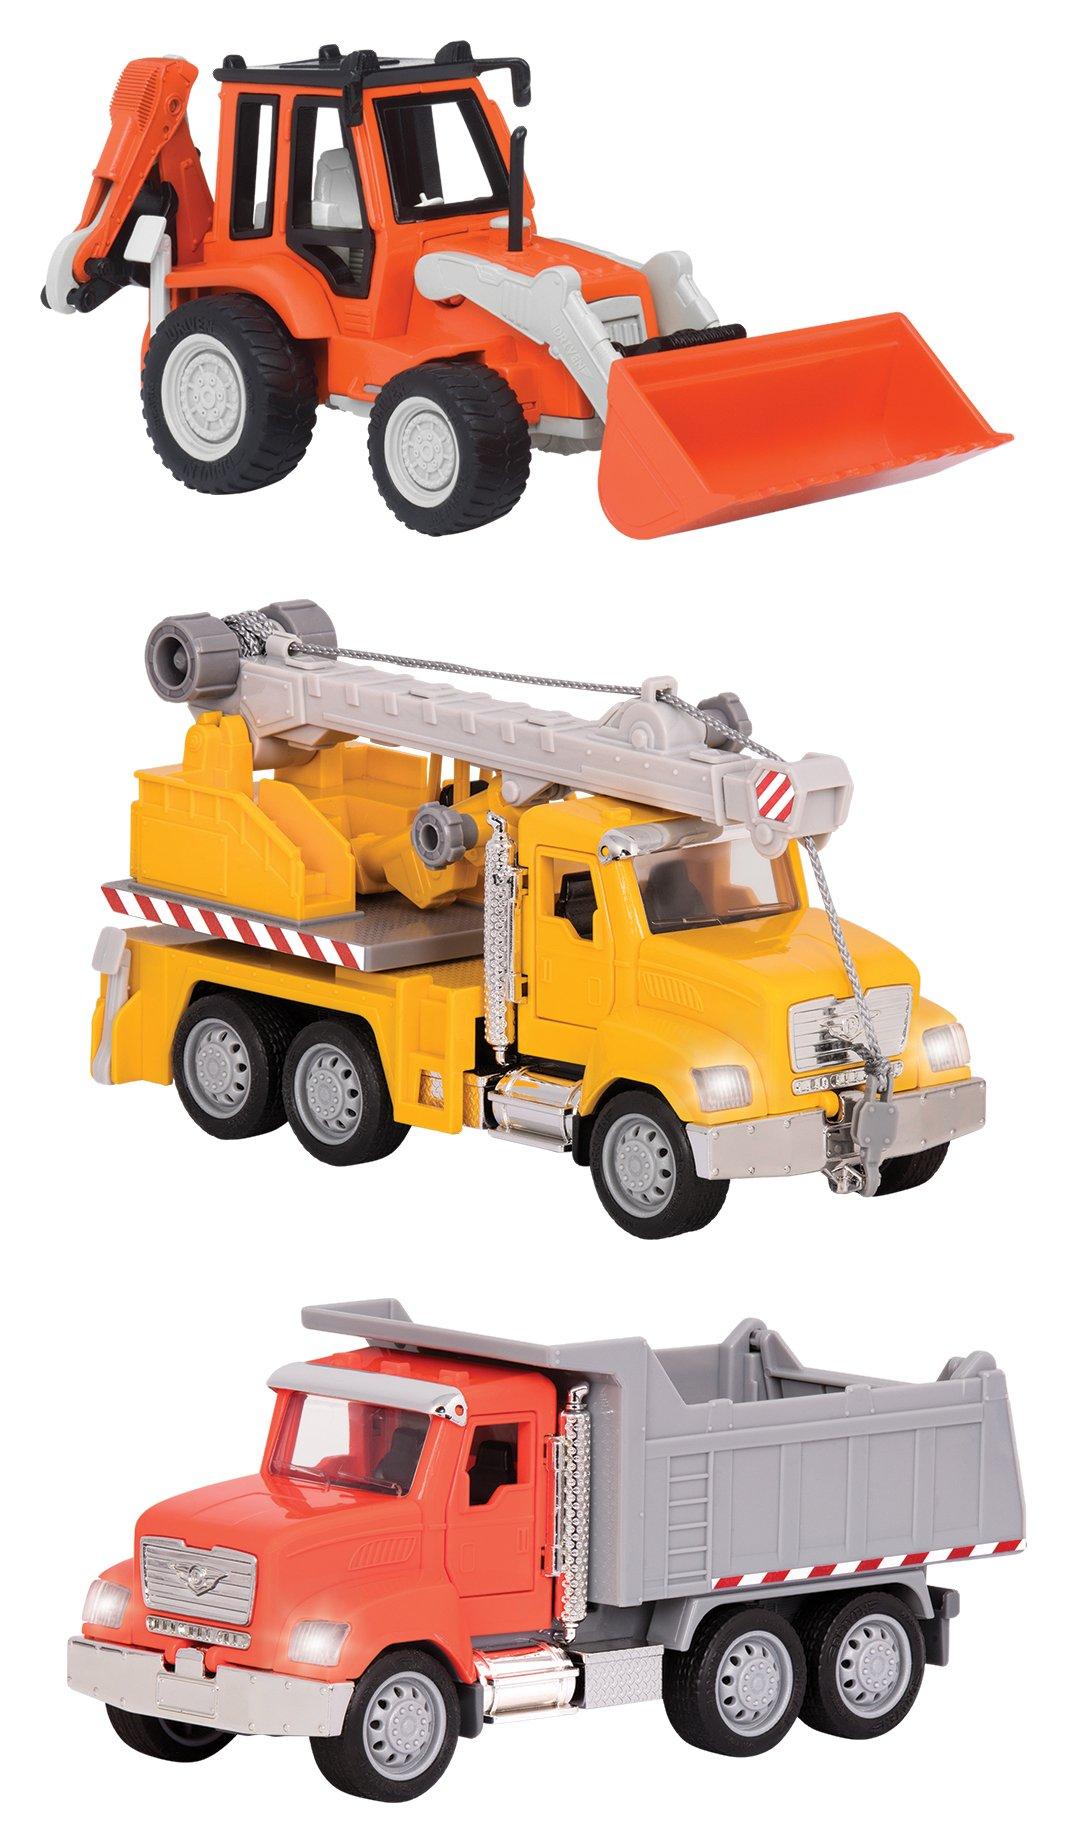 Micro Construction Vehicles Toy Playset